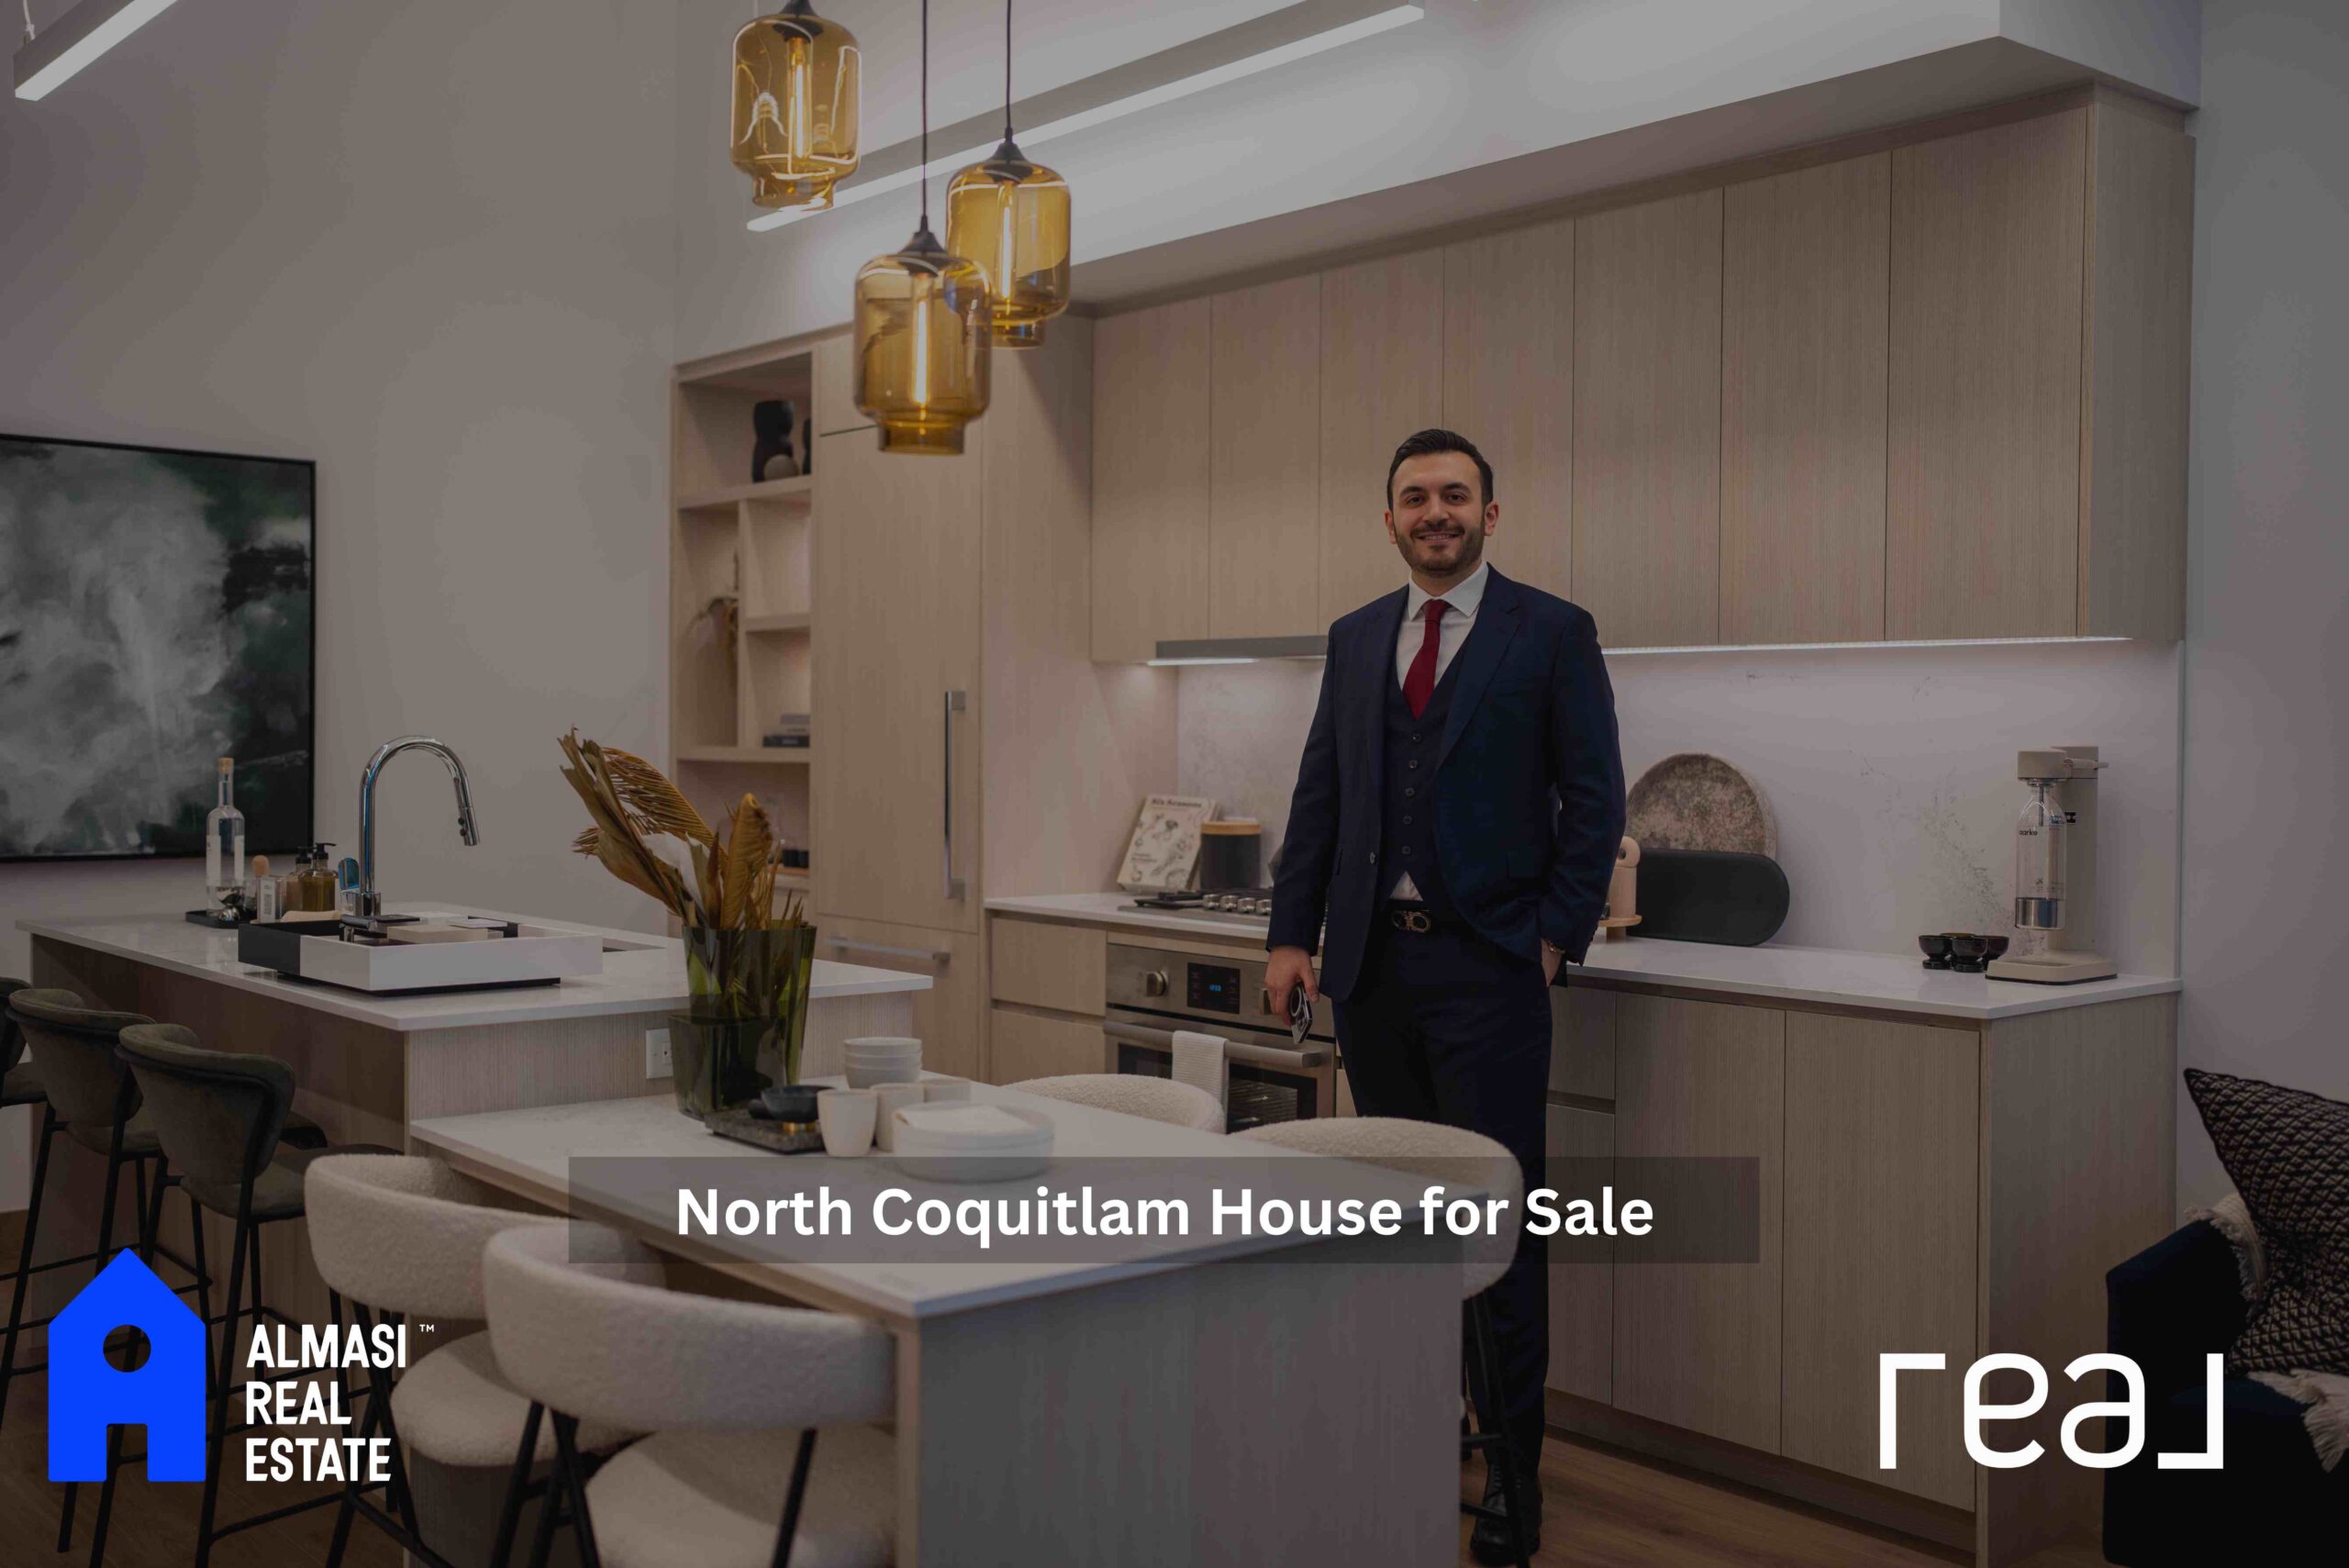 North Coquitlam House for Sale